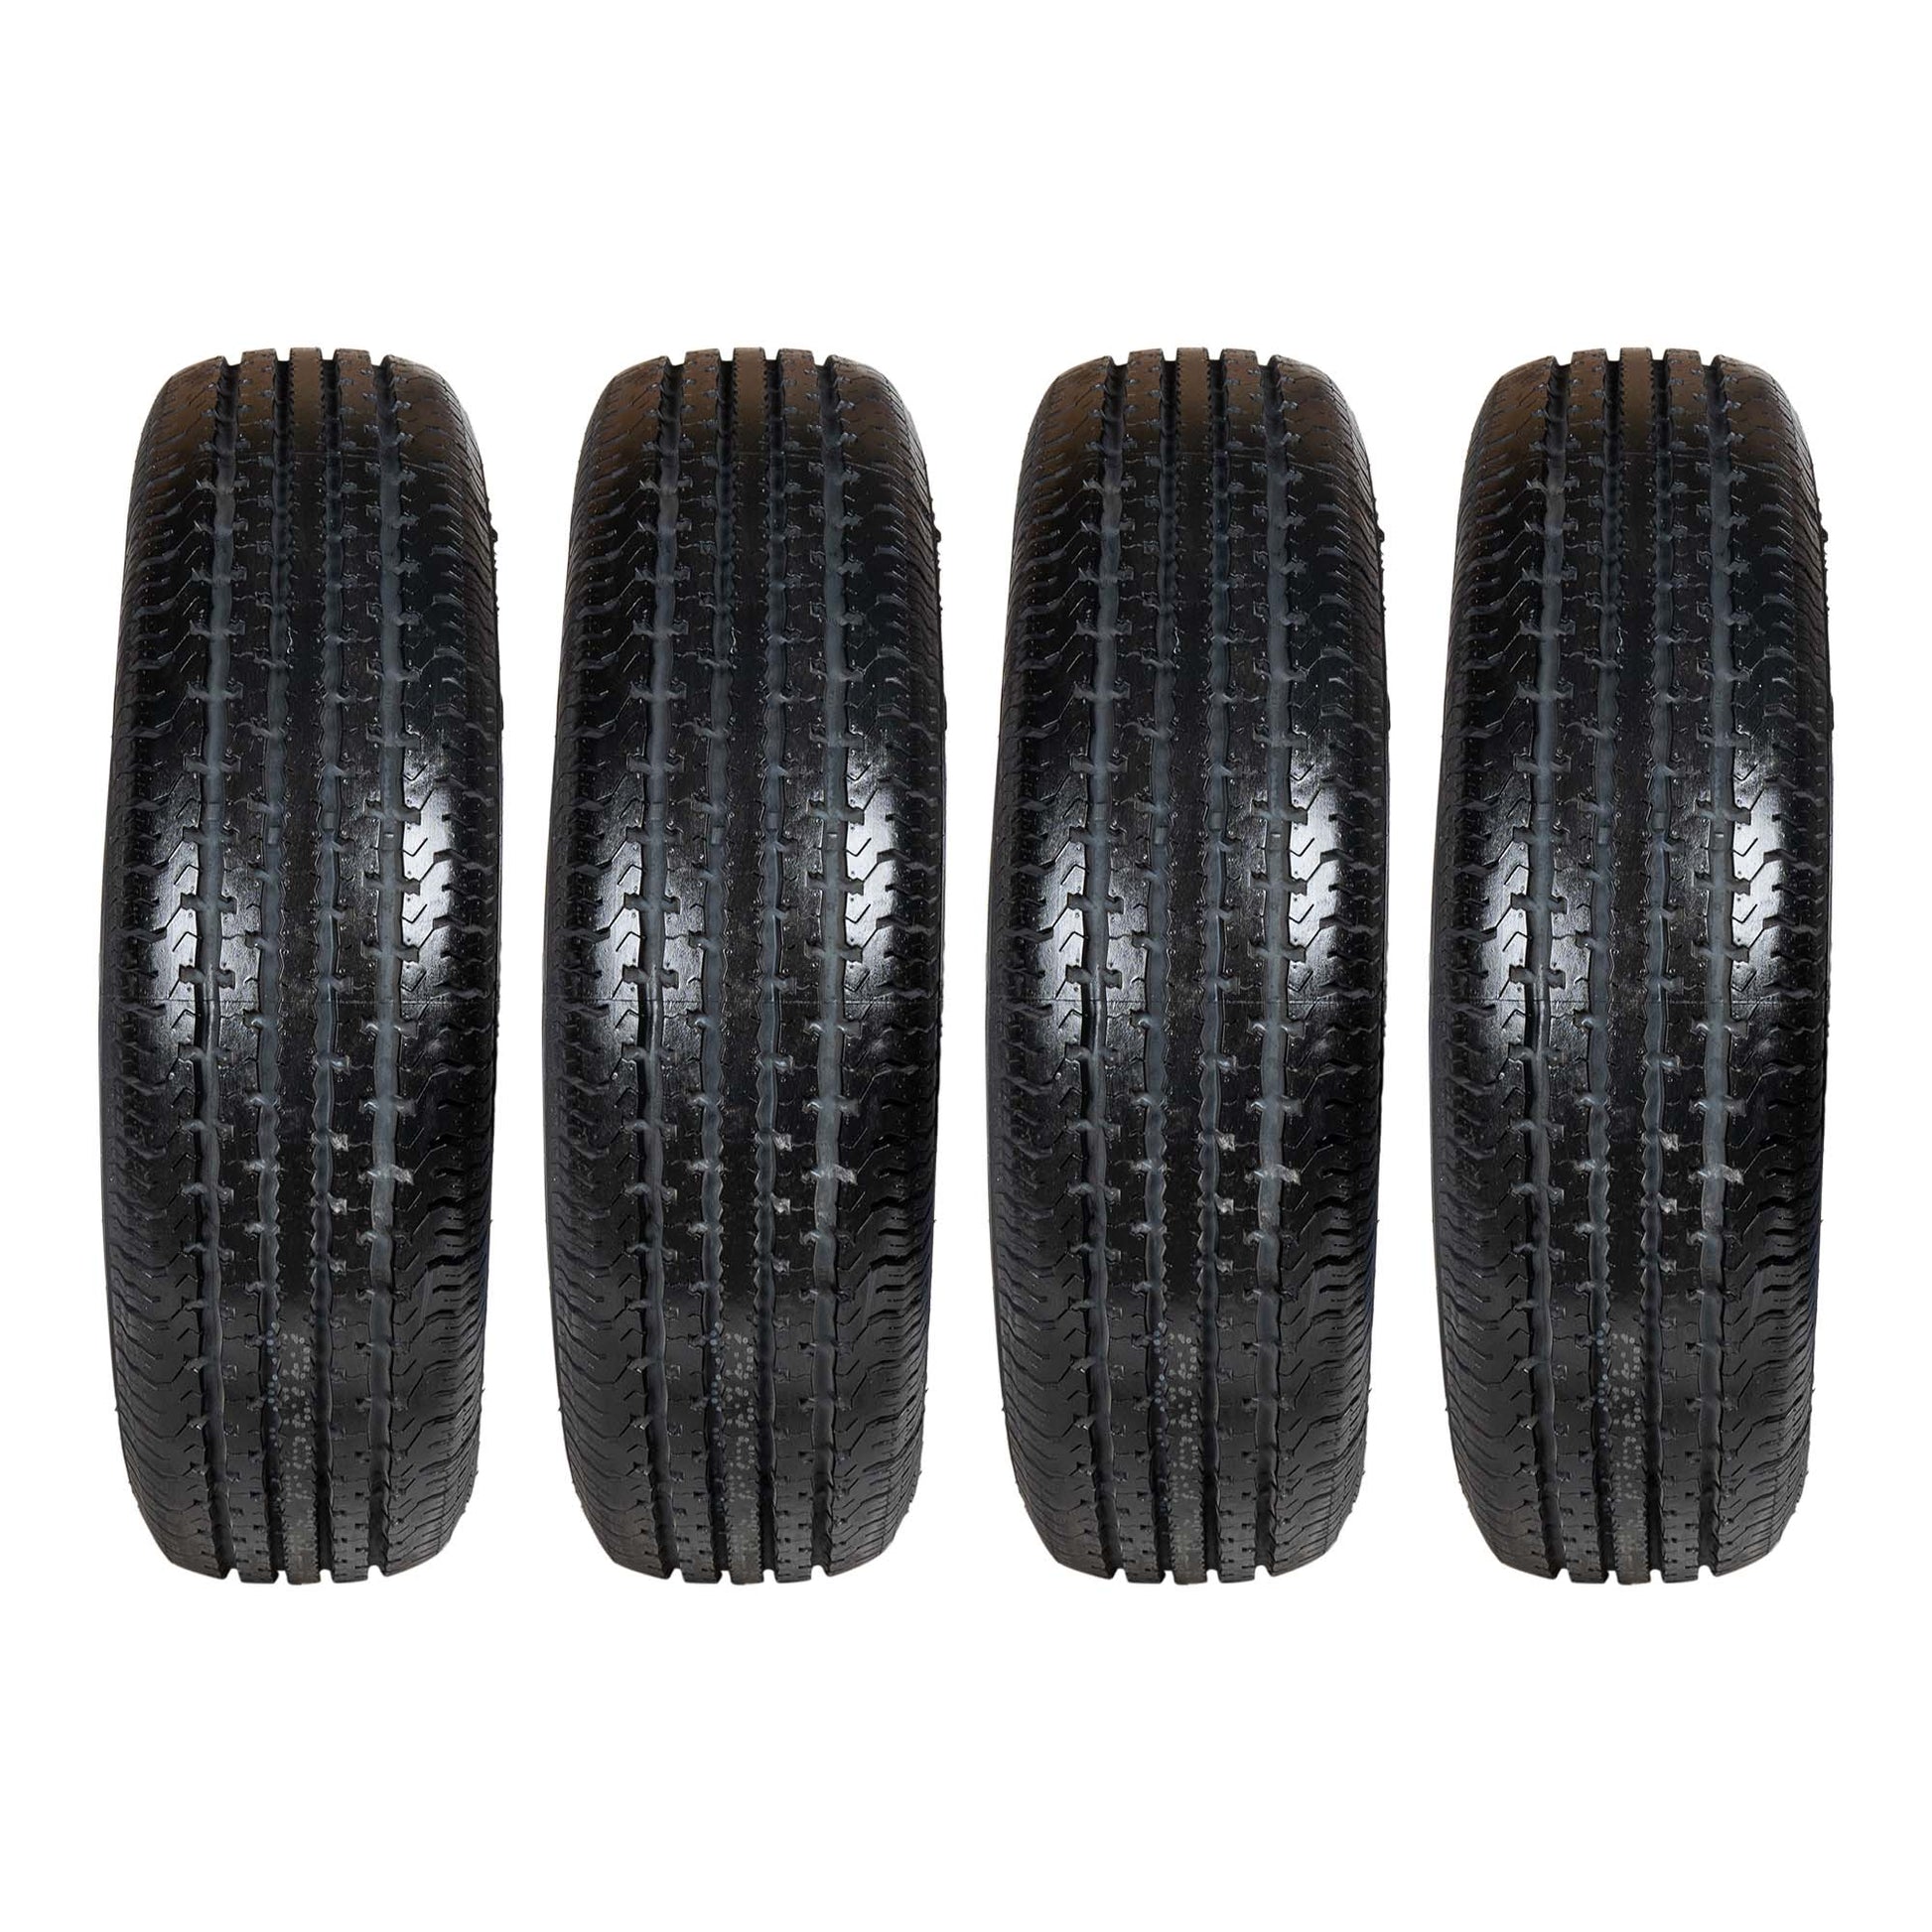 Taskmaster 225/75R15 10 Ply Trailer Tire - The Trailer Parts Outlet